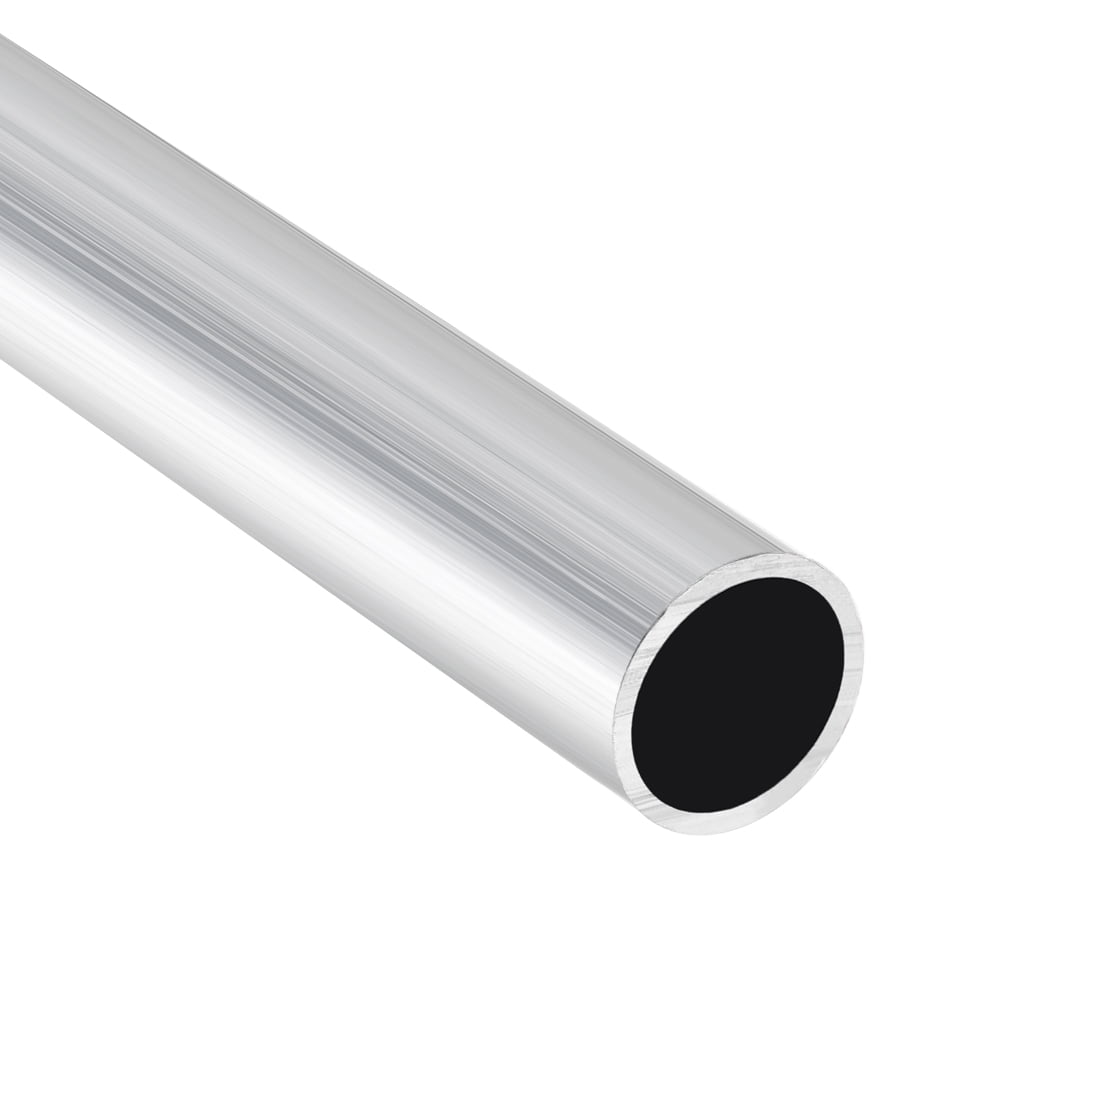 Profile made of aluminum as tube with internal track Ø 20mm in White Black  or Stainless steel color.